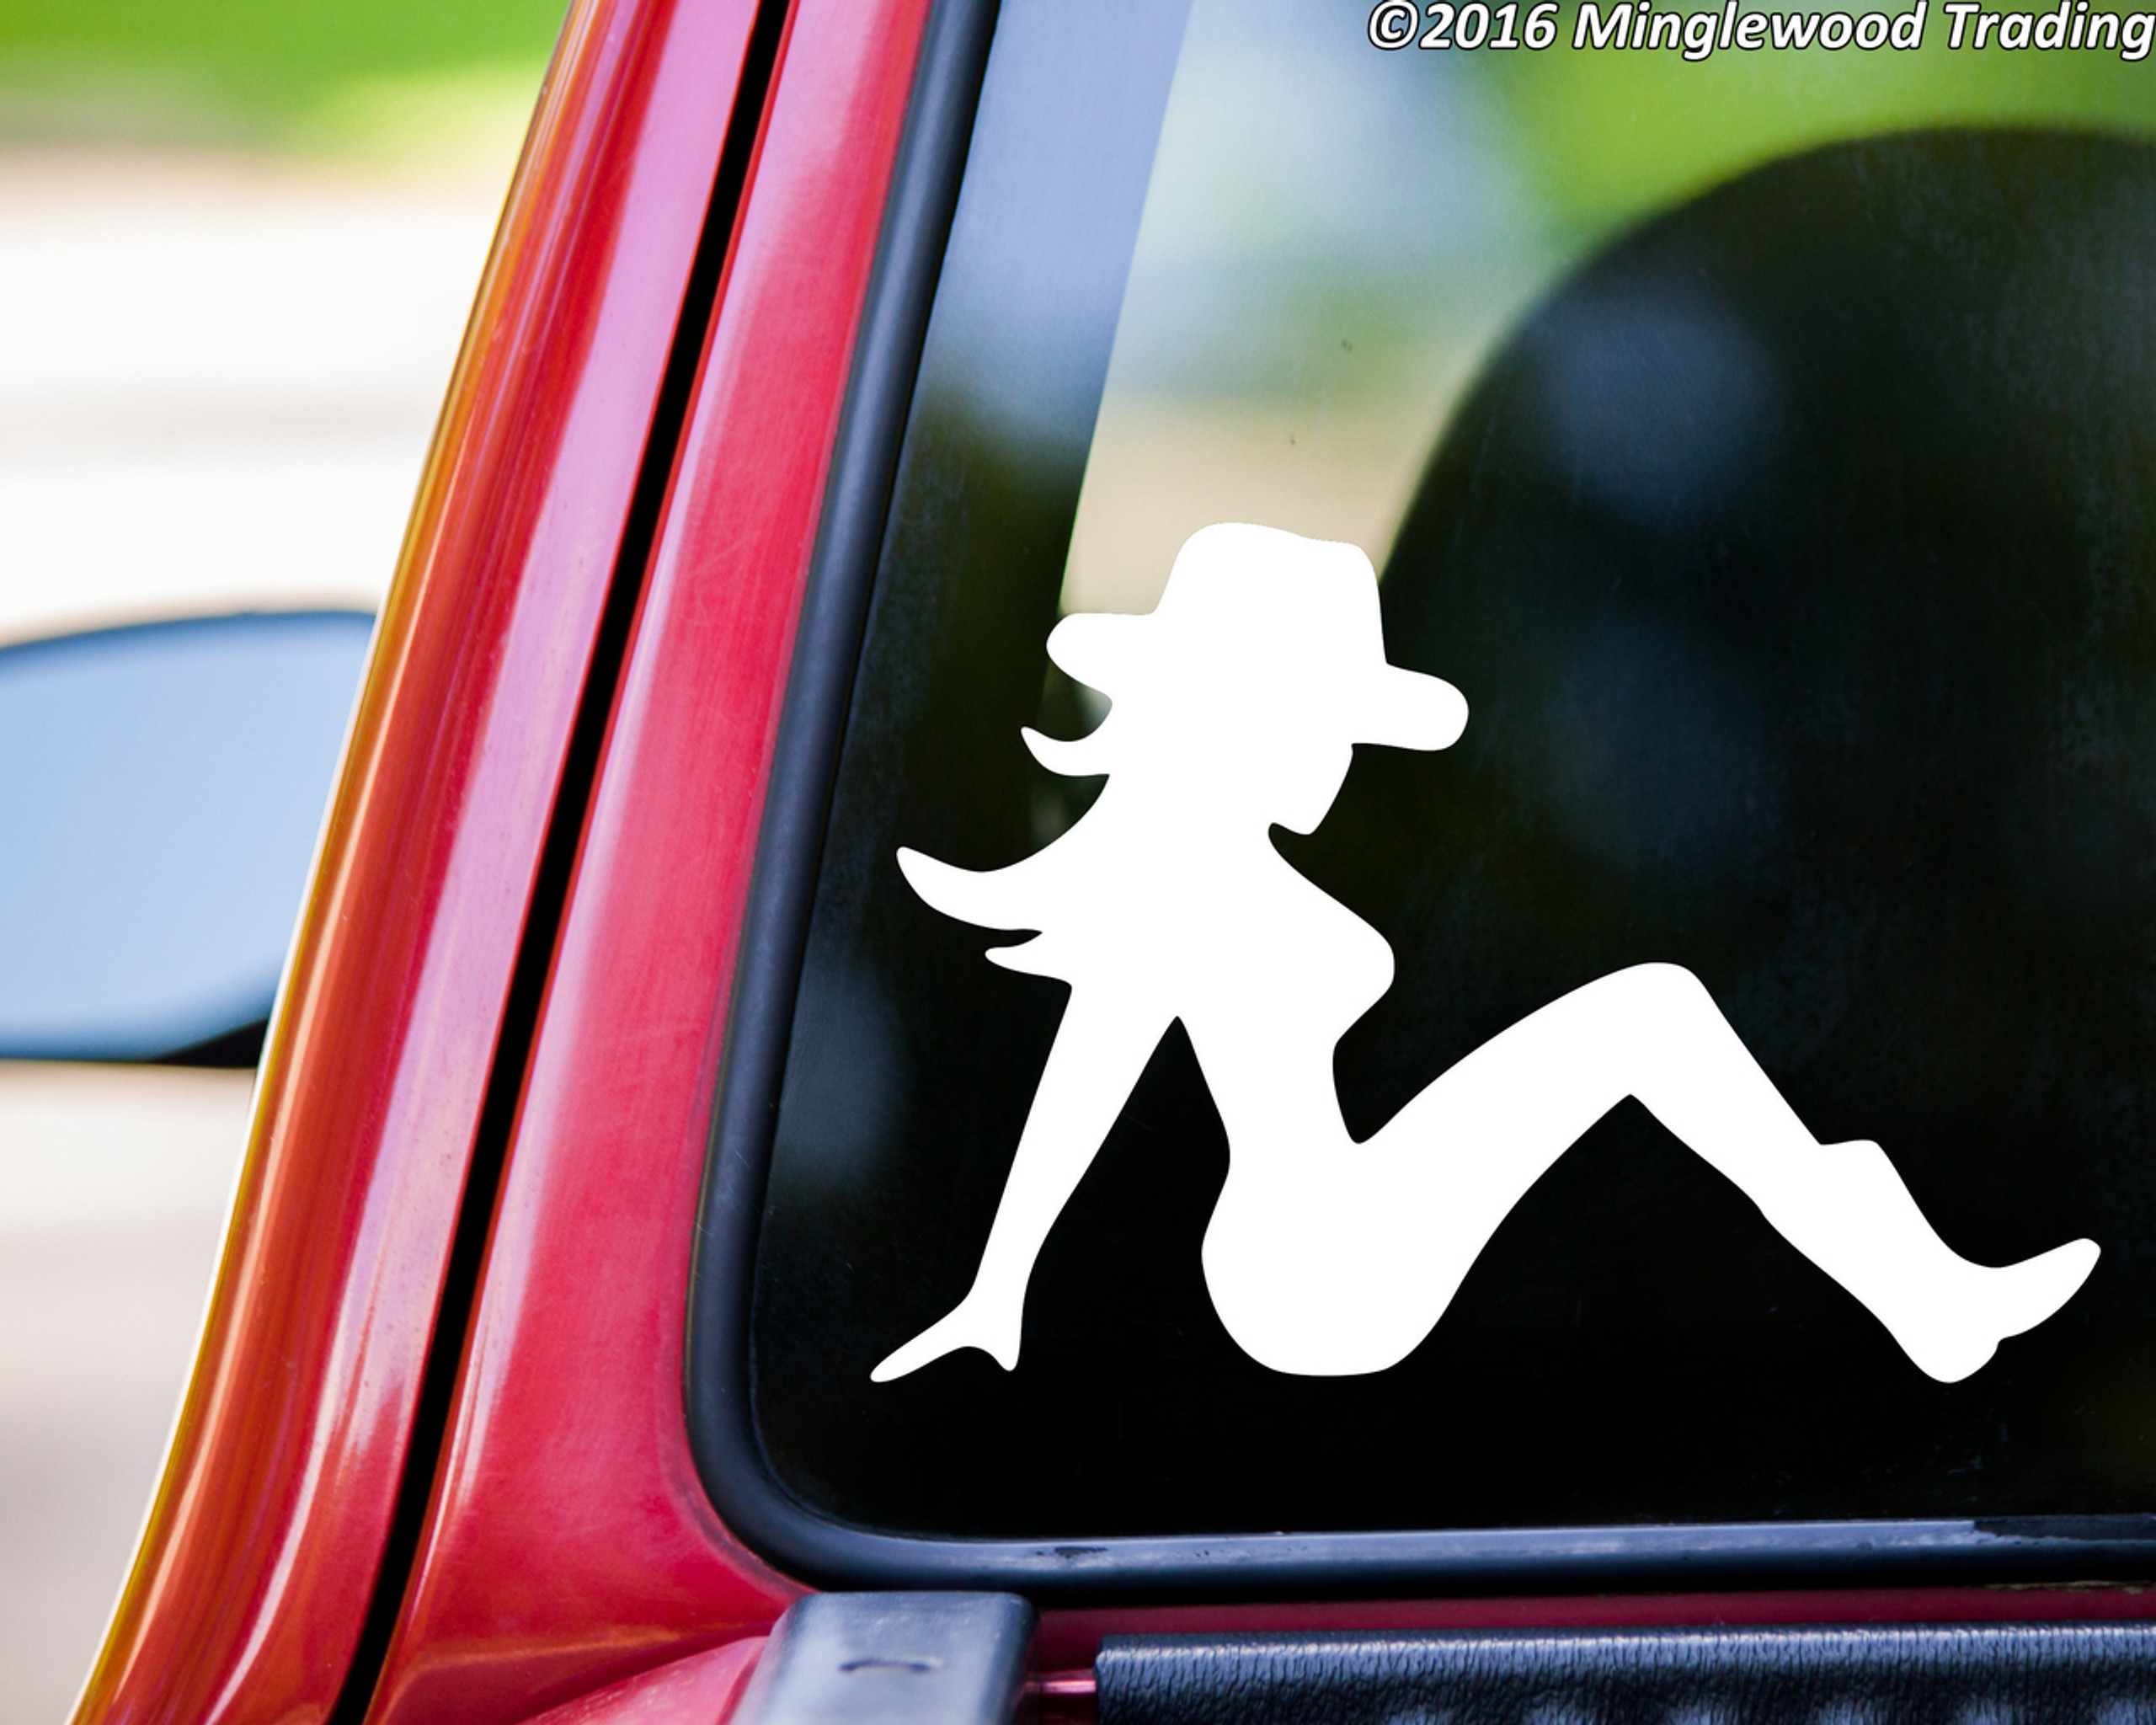 Buy Mudflap Cowgirl Vinyl Sticker Trucker Girl Lady Silhouette Country Truck Die Cut Decal 1422